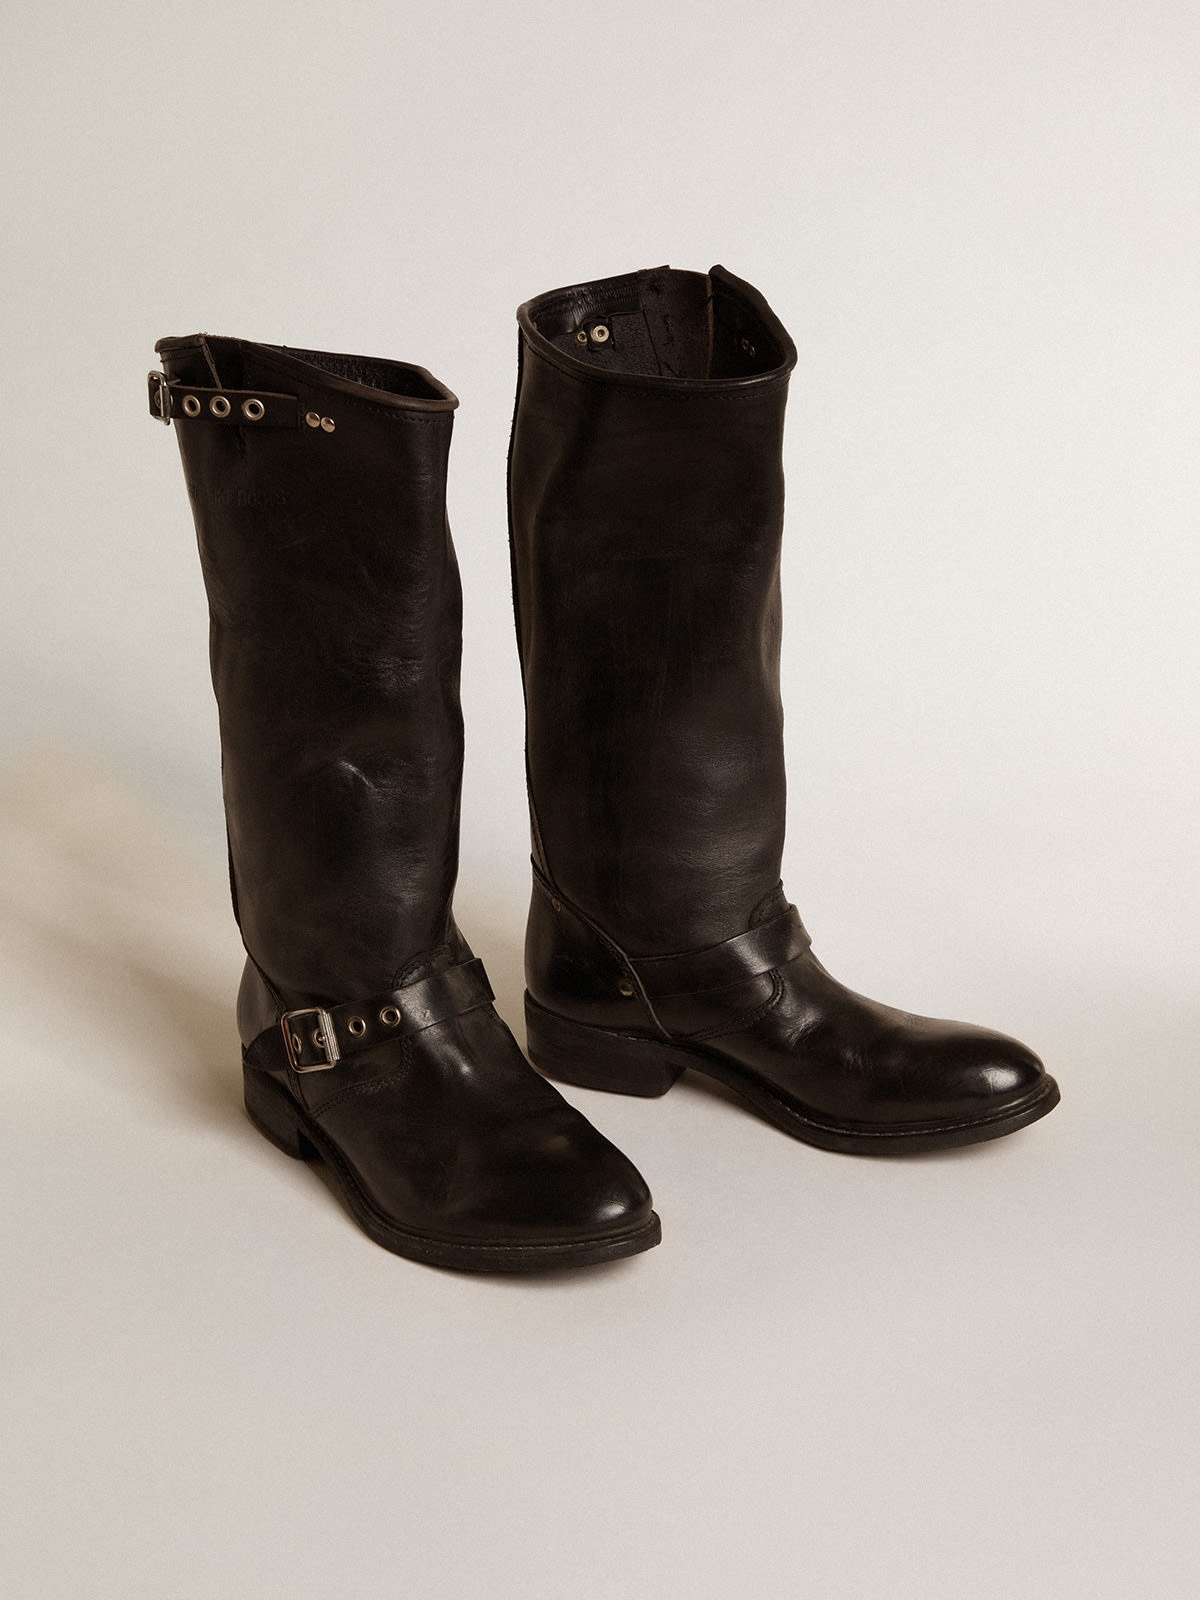 High Biker boots in black leather with silver studs and buckles - 2